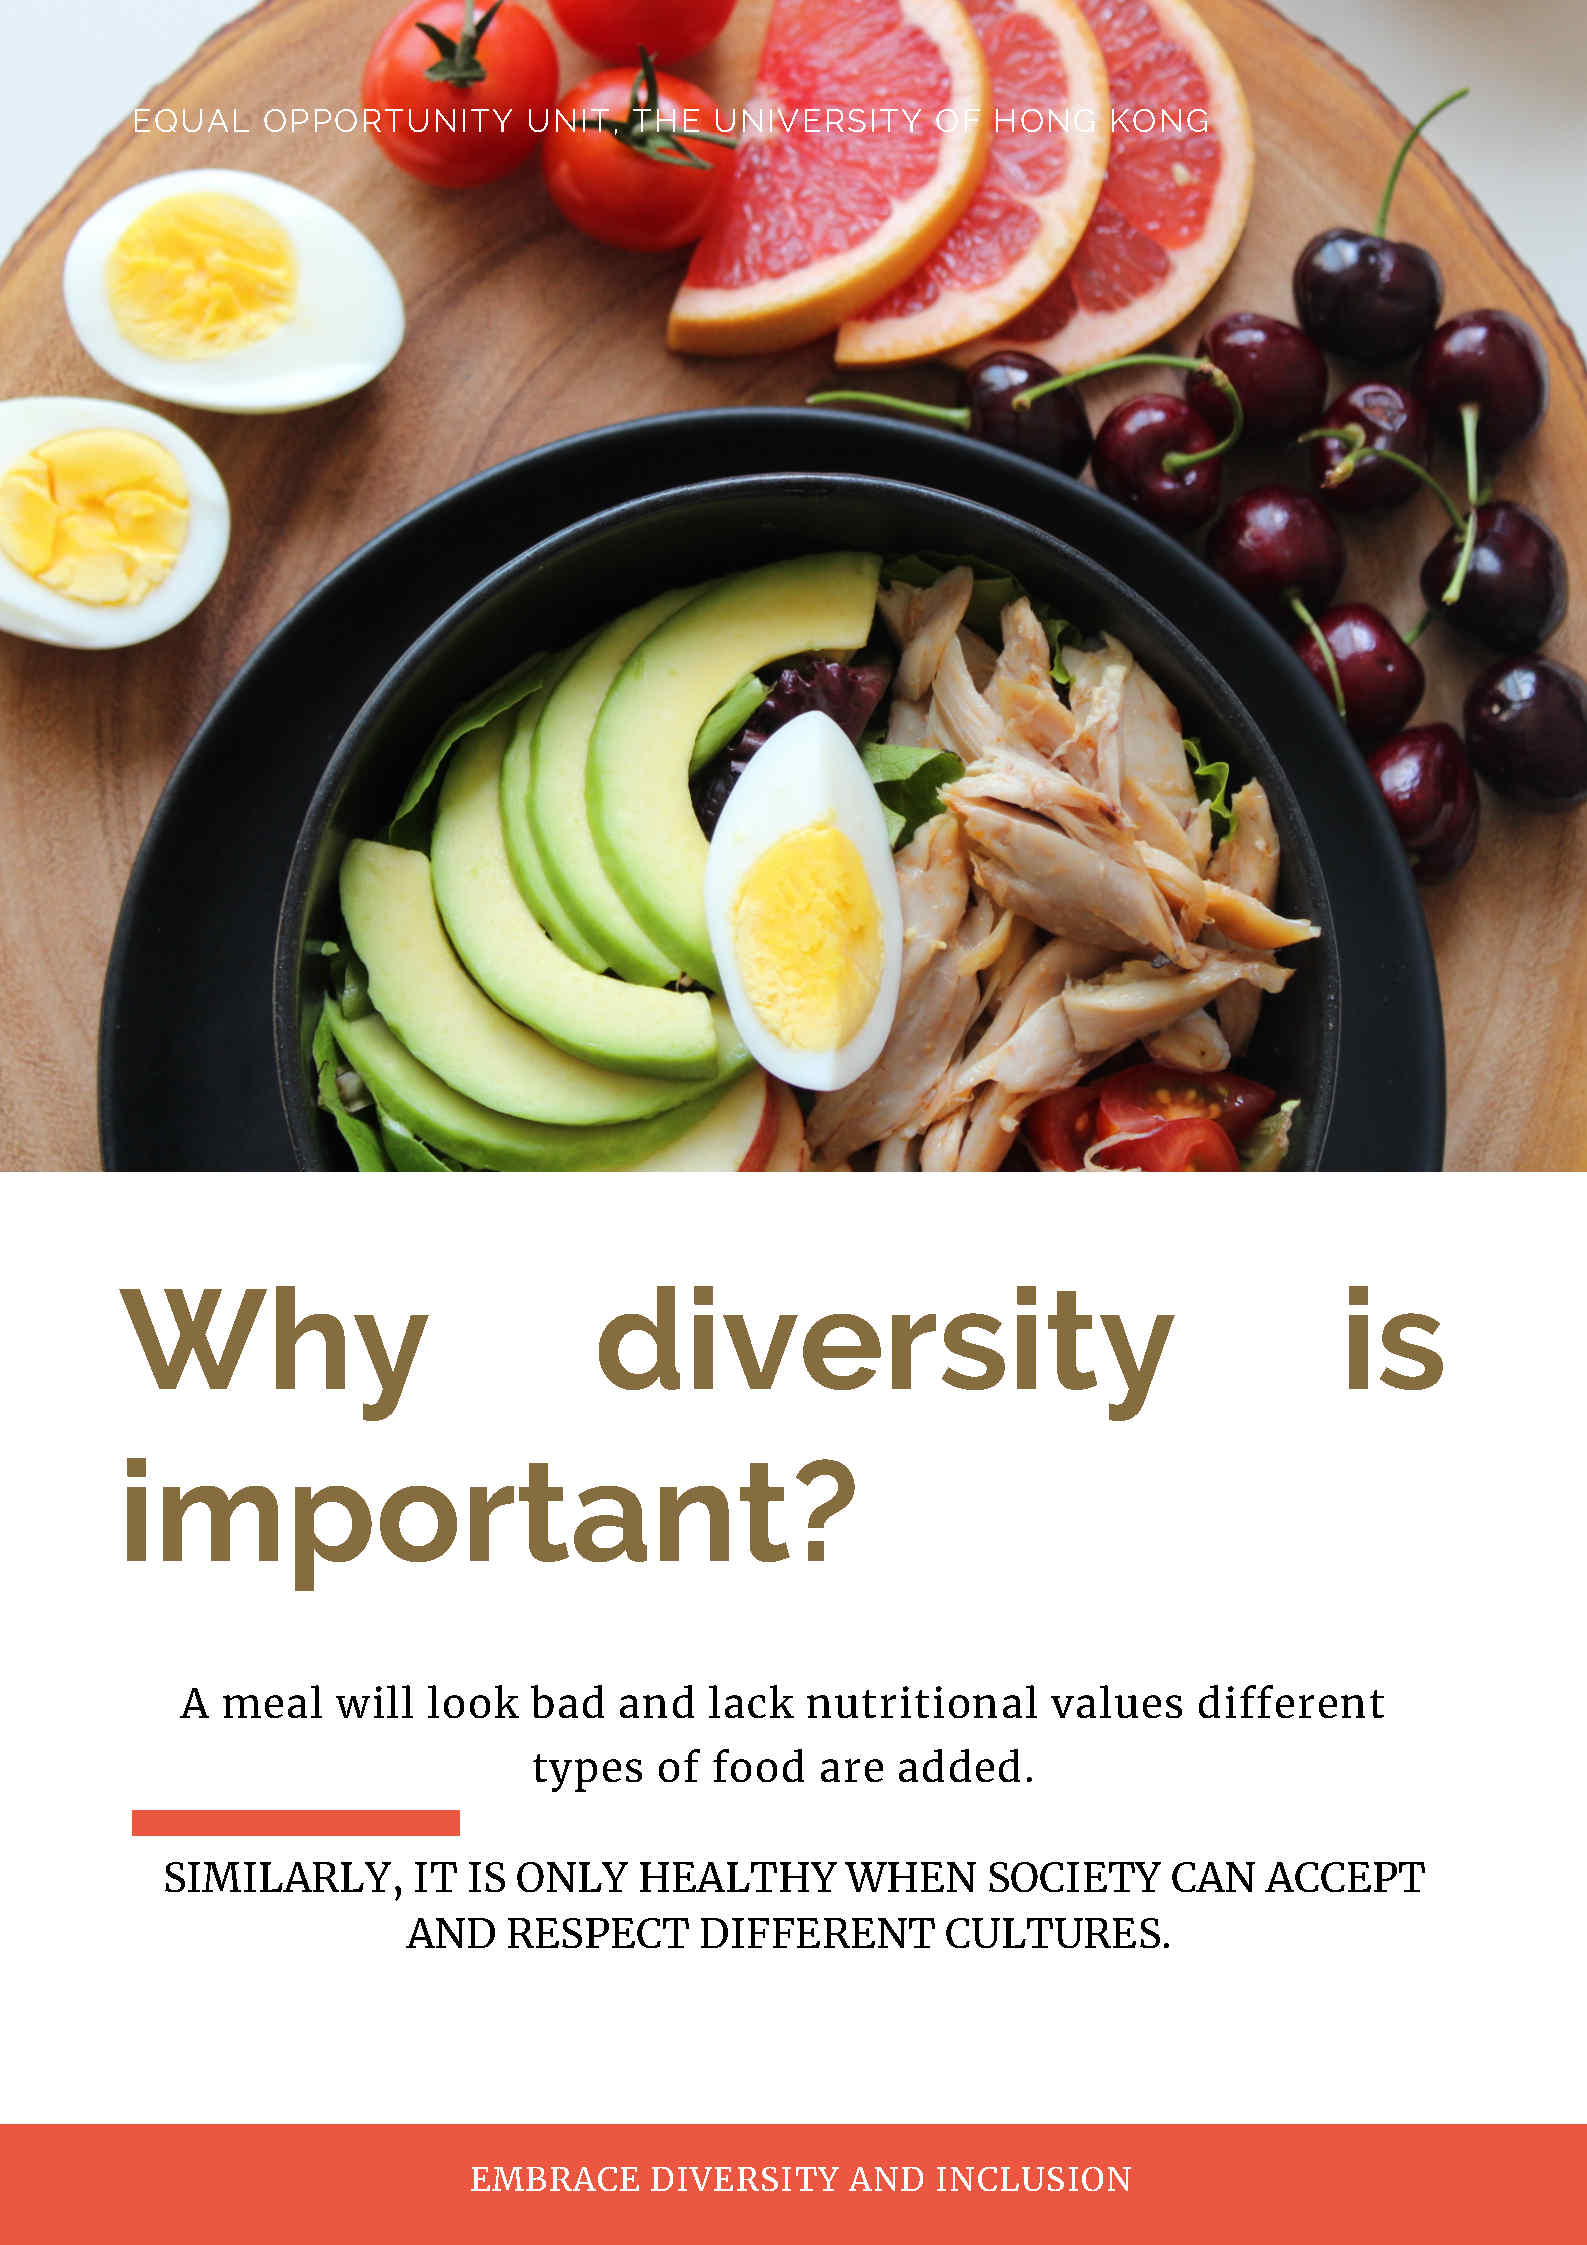 Merit: Cheng Yu Sang Vincent (From food to good) In this poster, I used food as a metaphor to show how a society needs diversity and inclusion to thrive.